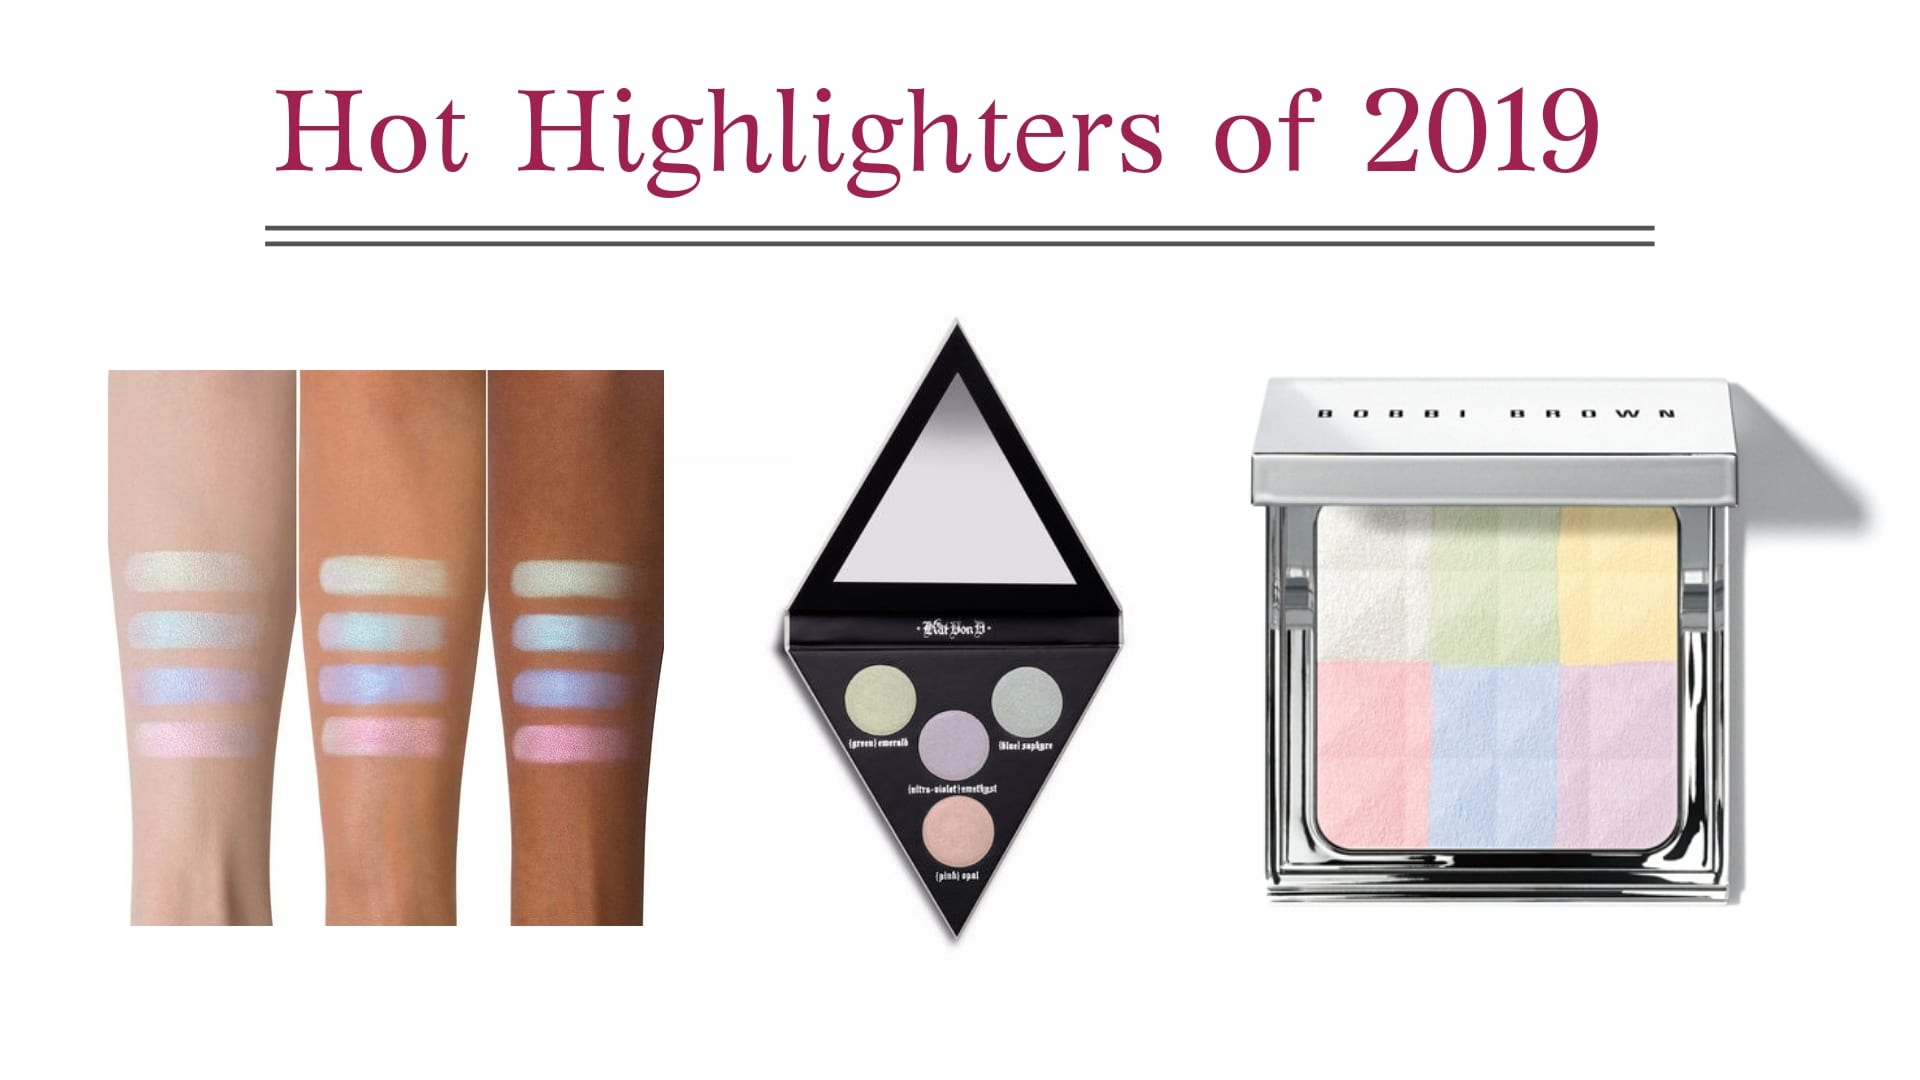 Hot Highlighters of 2019